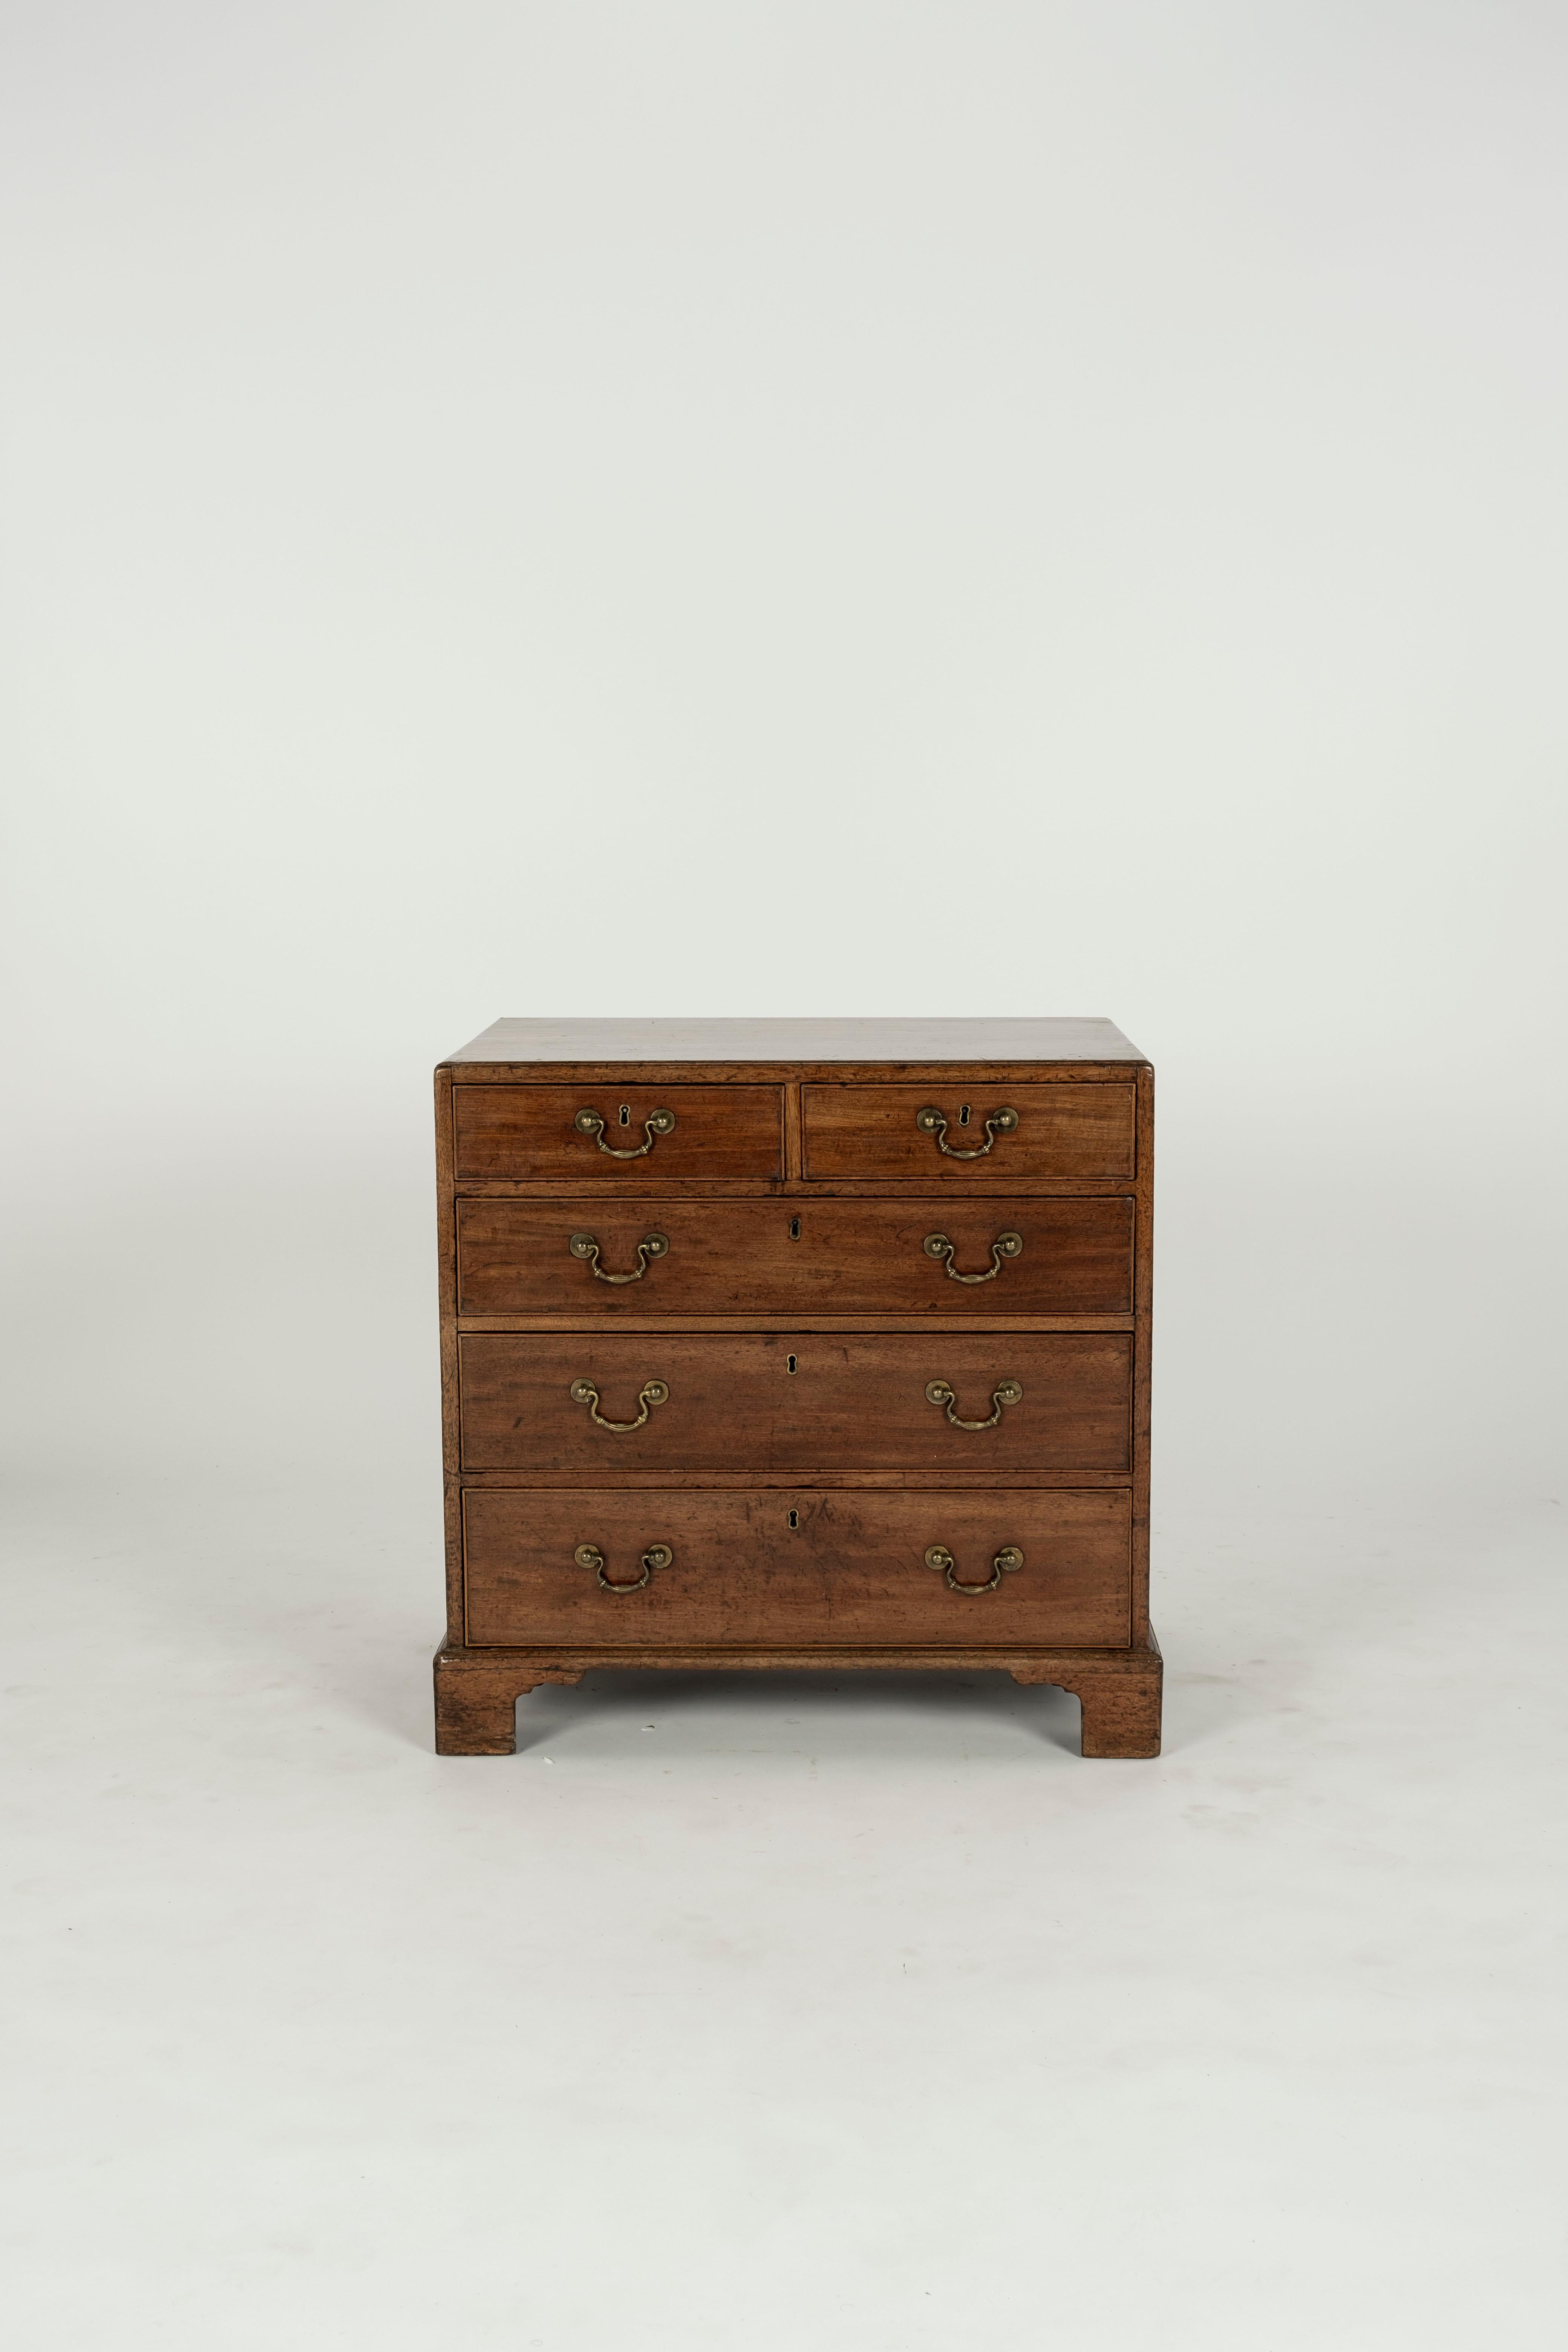  Late 18th c mahogany caddy top chest of drawers circa  1780.  Clean Lines.